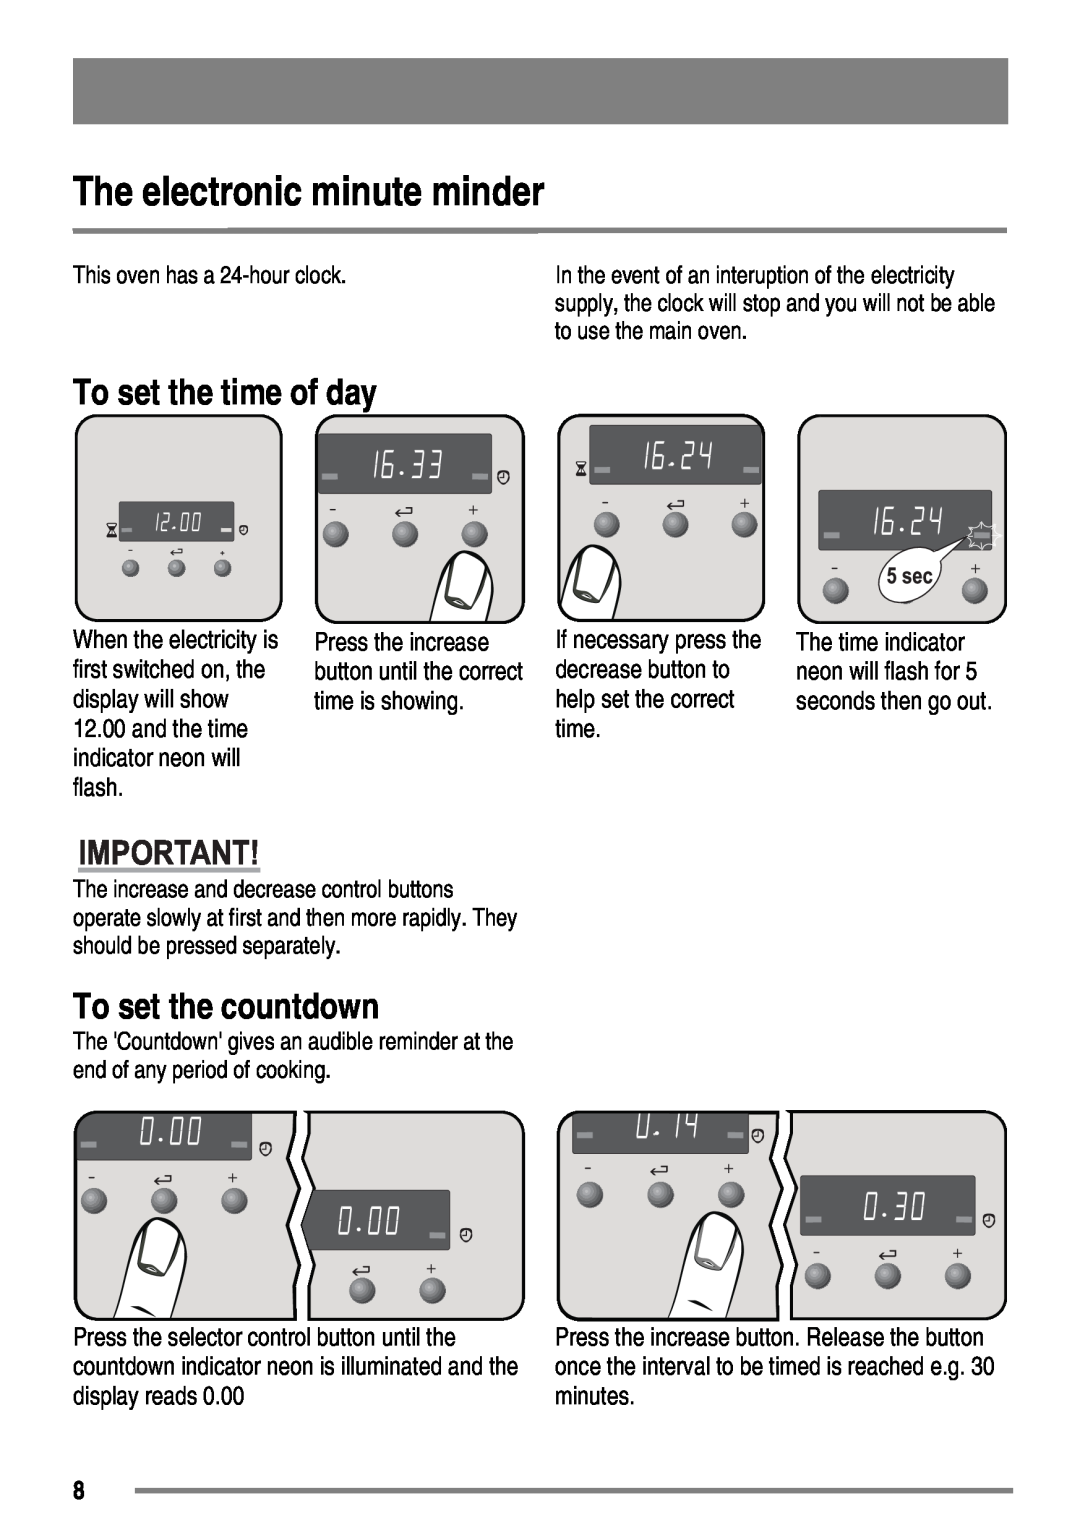 Zanussi ZKG6020 user manual The electronic minute minder, To set the time of day, To set the countdown 